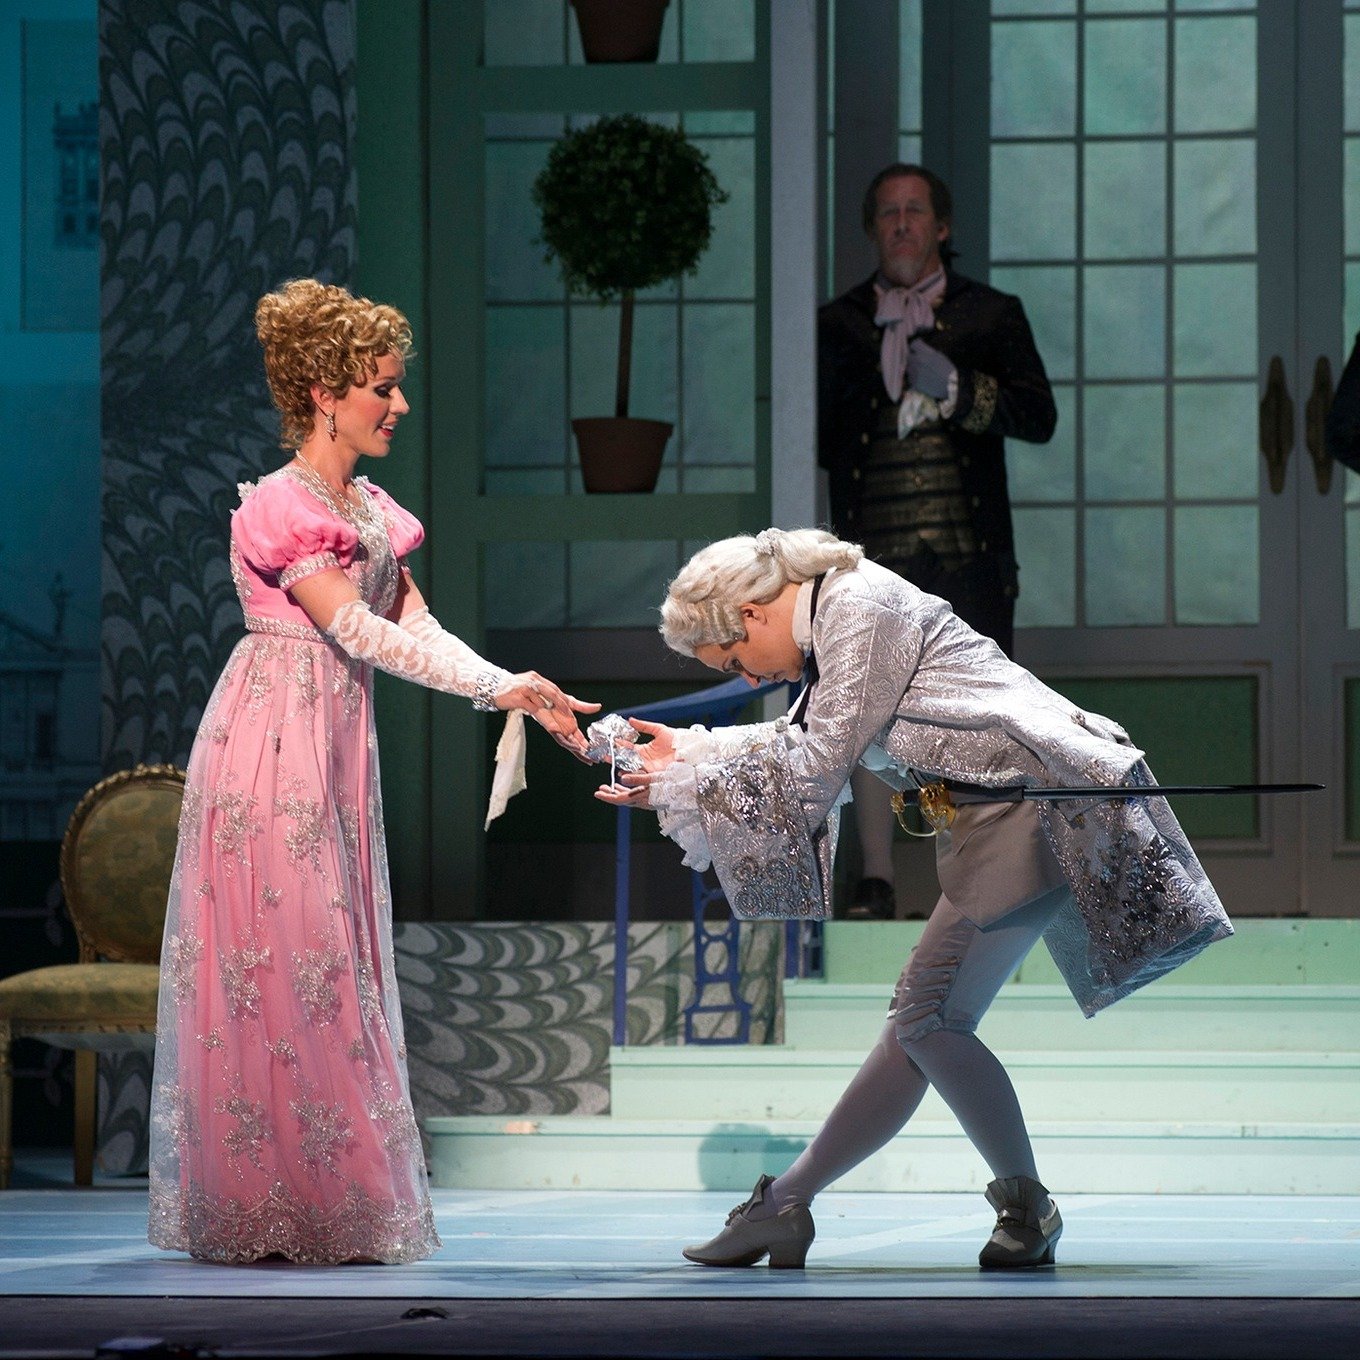 It's May Day, an ancient holiday in many cultures celebrating the arrival of spring with dancing and singing. We tip our hat to the season with photos from our 2013 production of DER ROSENKAVALIER by Richard Strauss, which includes an act that takes 